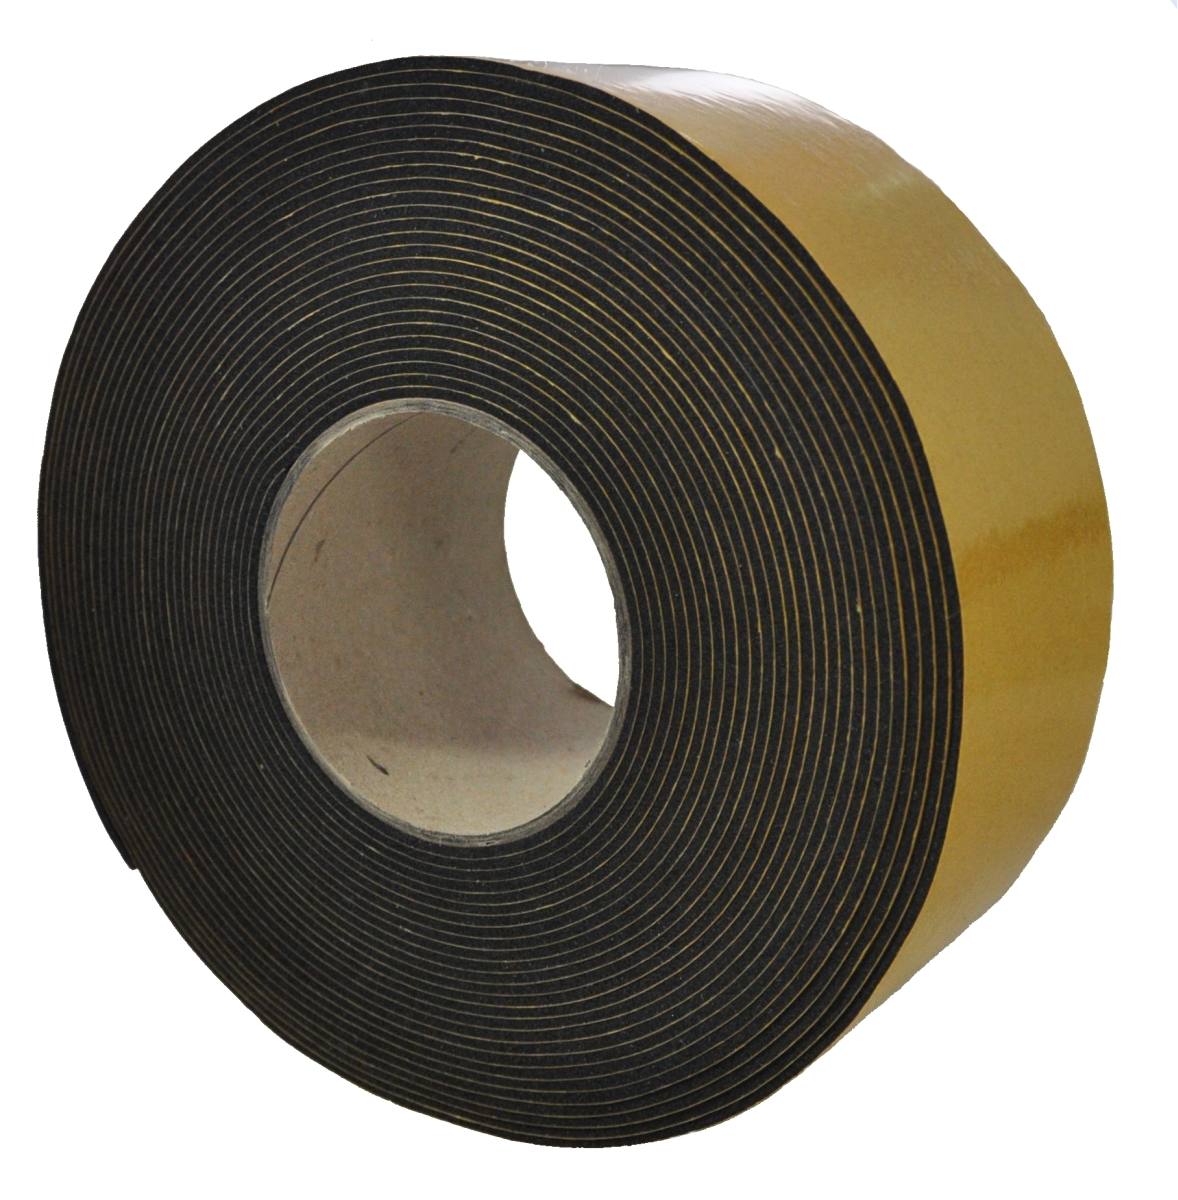 S-K-S EPDM 6mmx75mmx10m black self-adhesive on one side